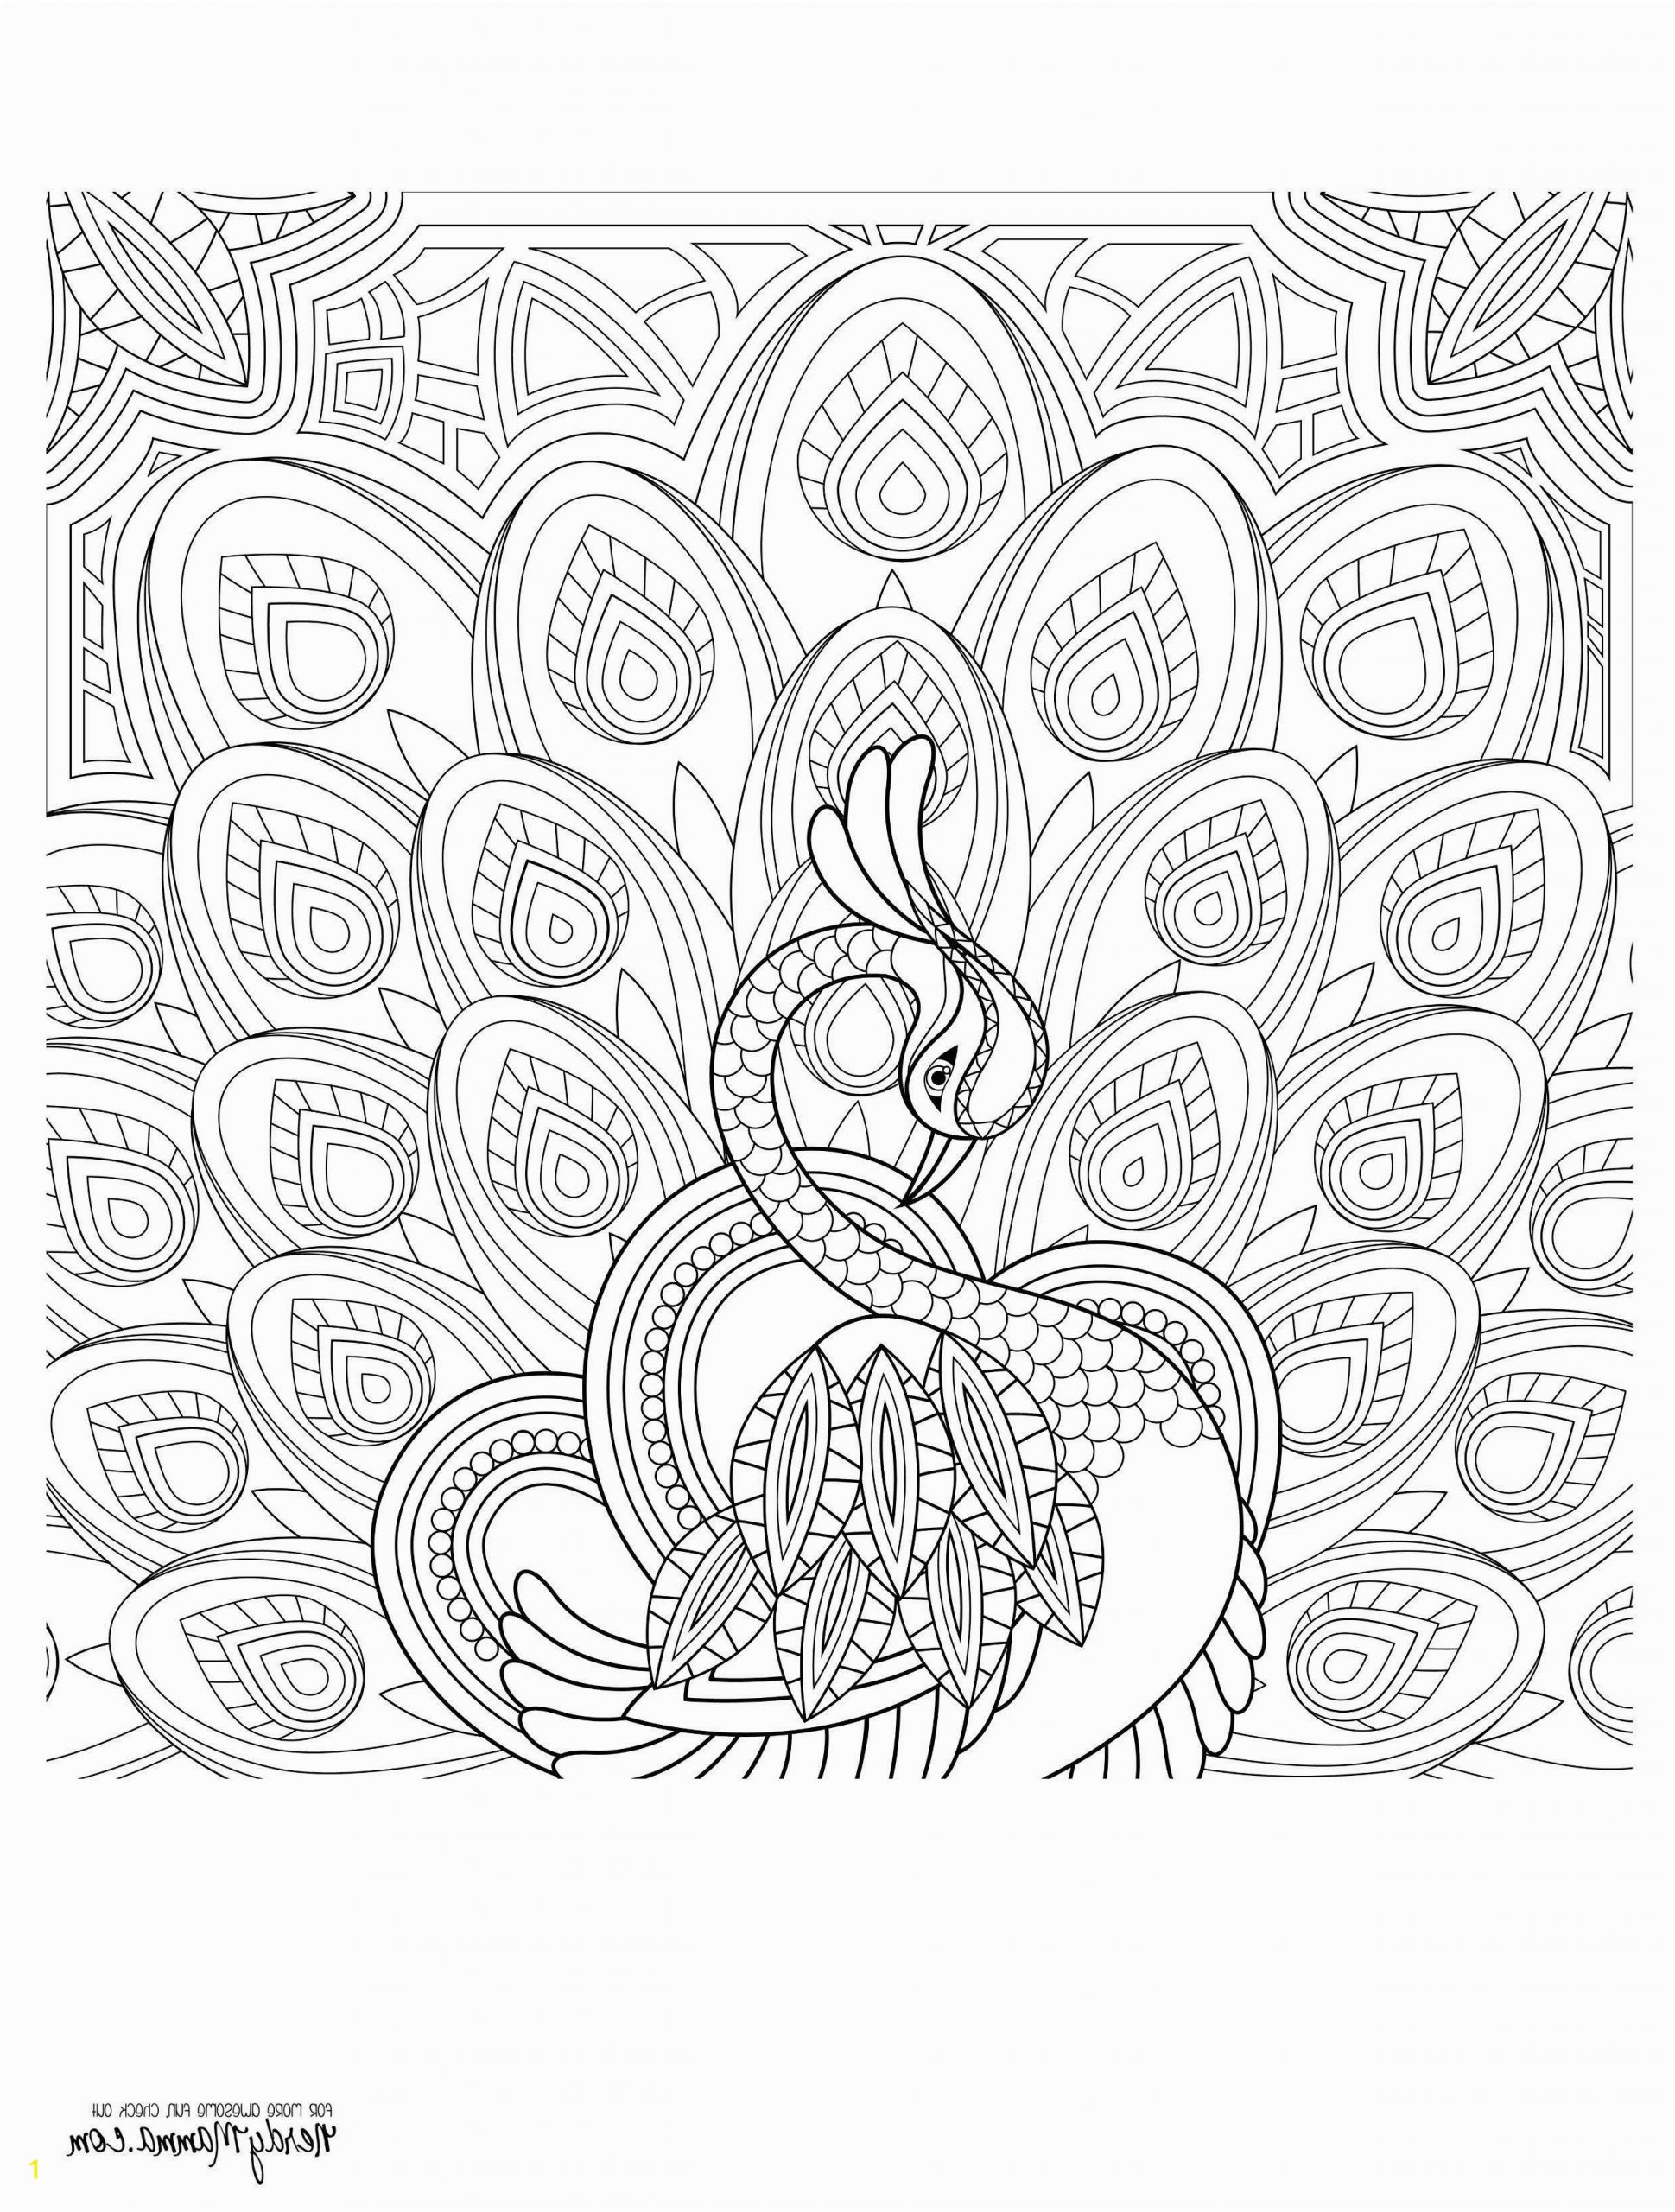 firefighters coloring page new collection best surfing board coloring pages thebookisonthetable of firefighters coloring page